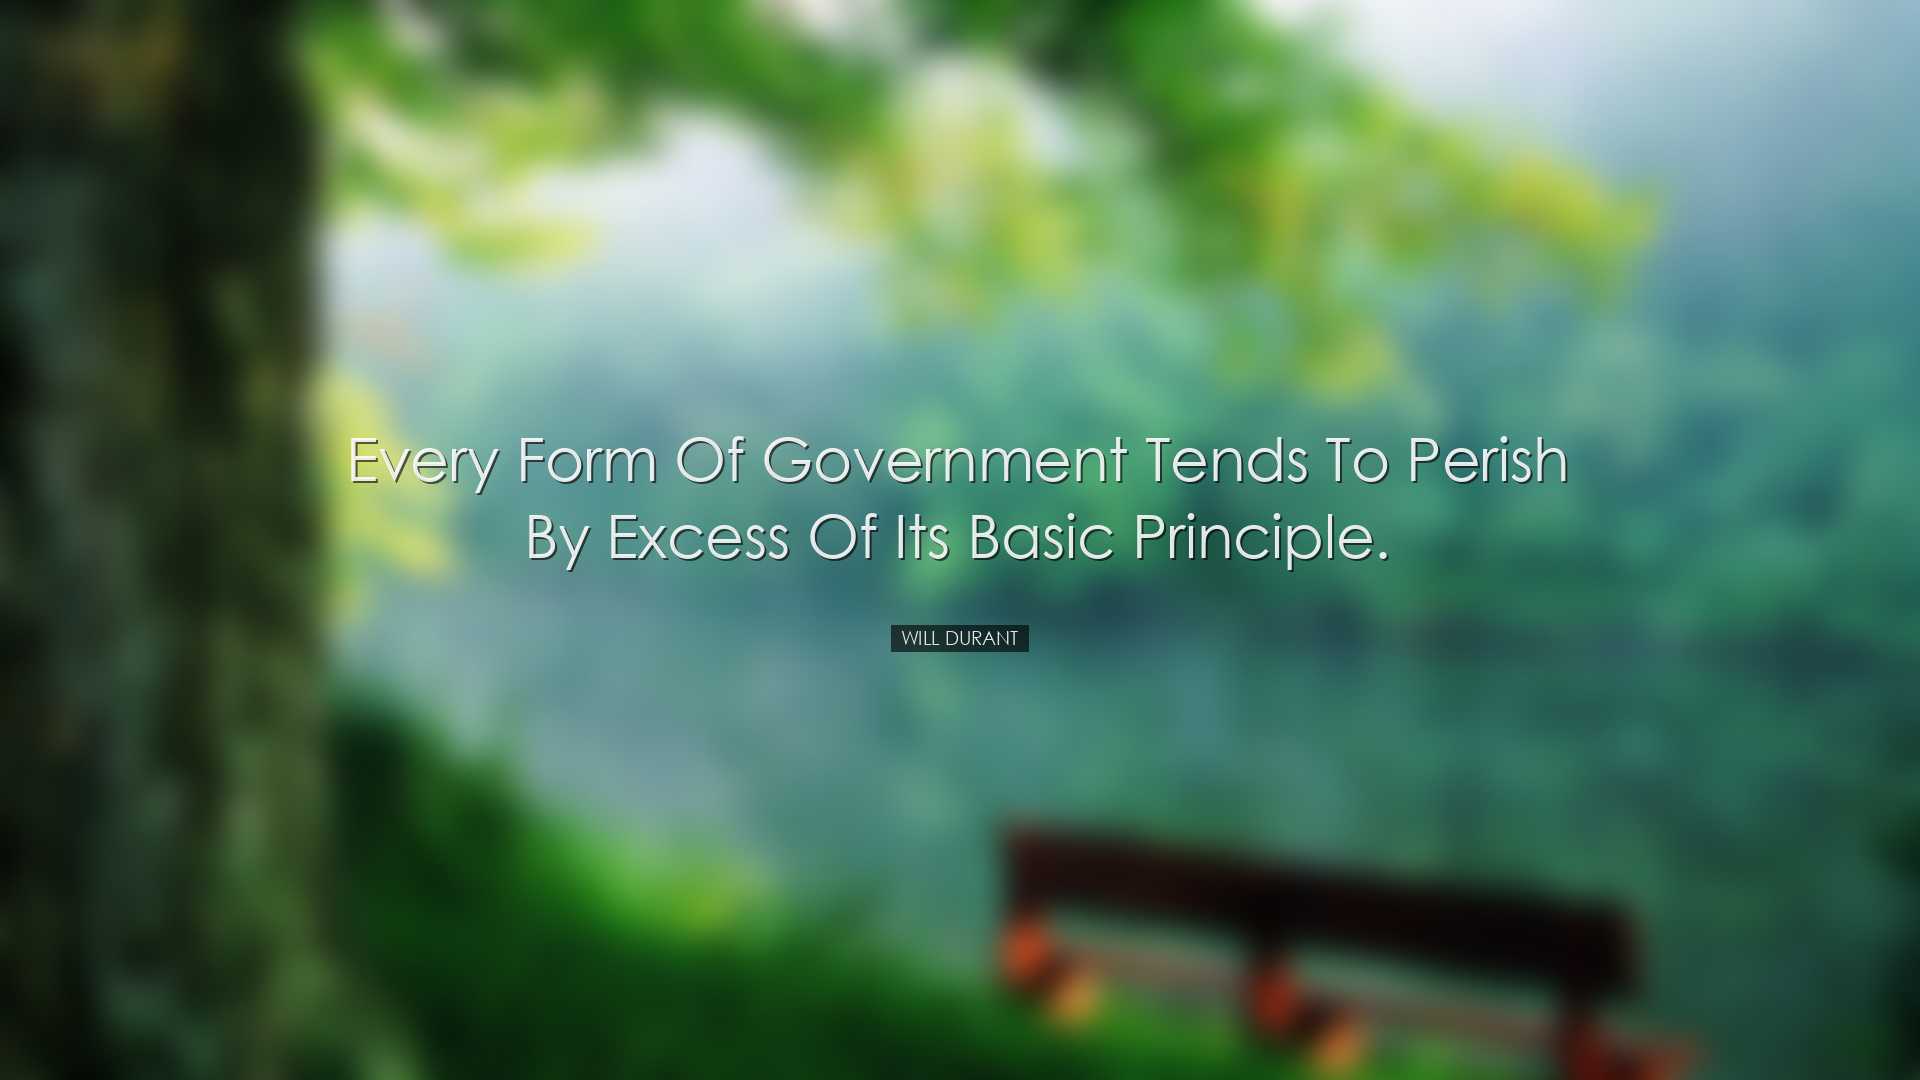 Every form of government tends to perish by excess of its basic pr